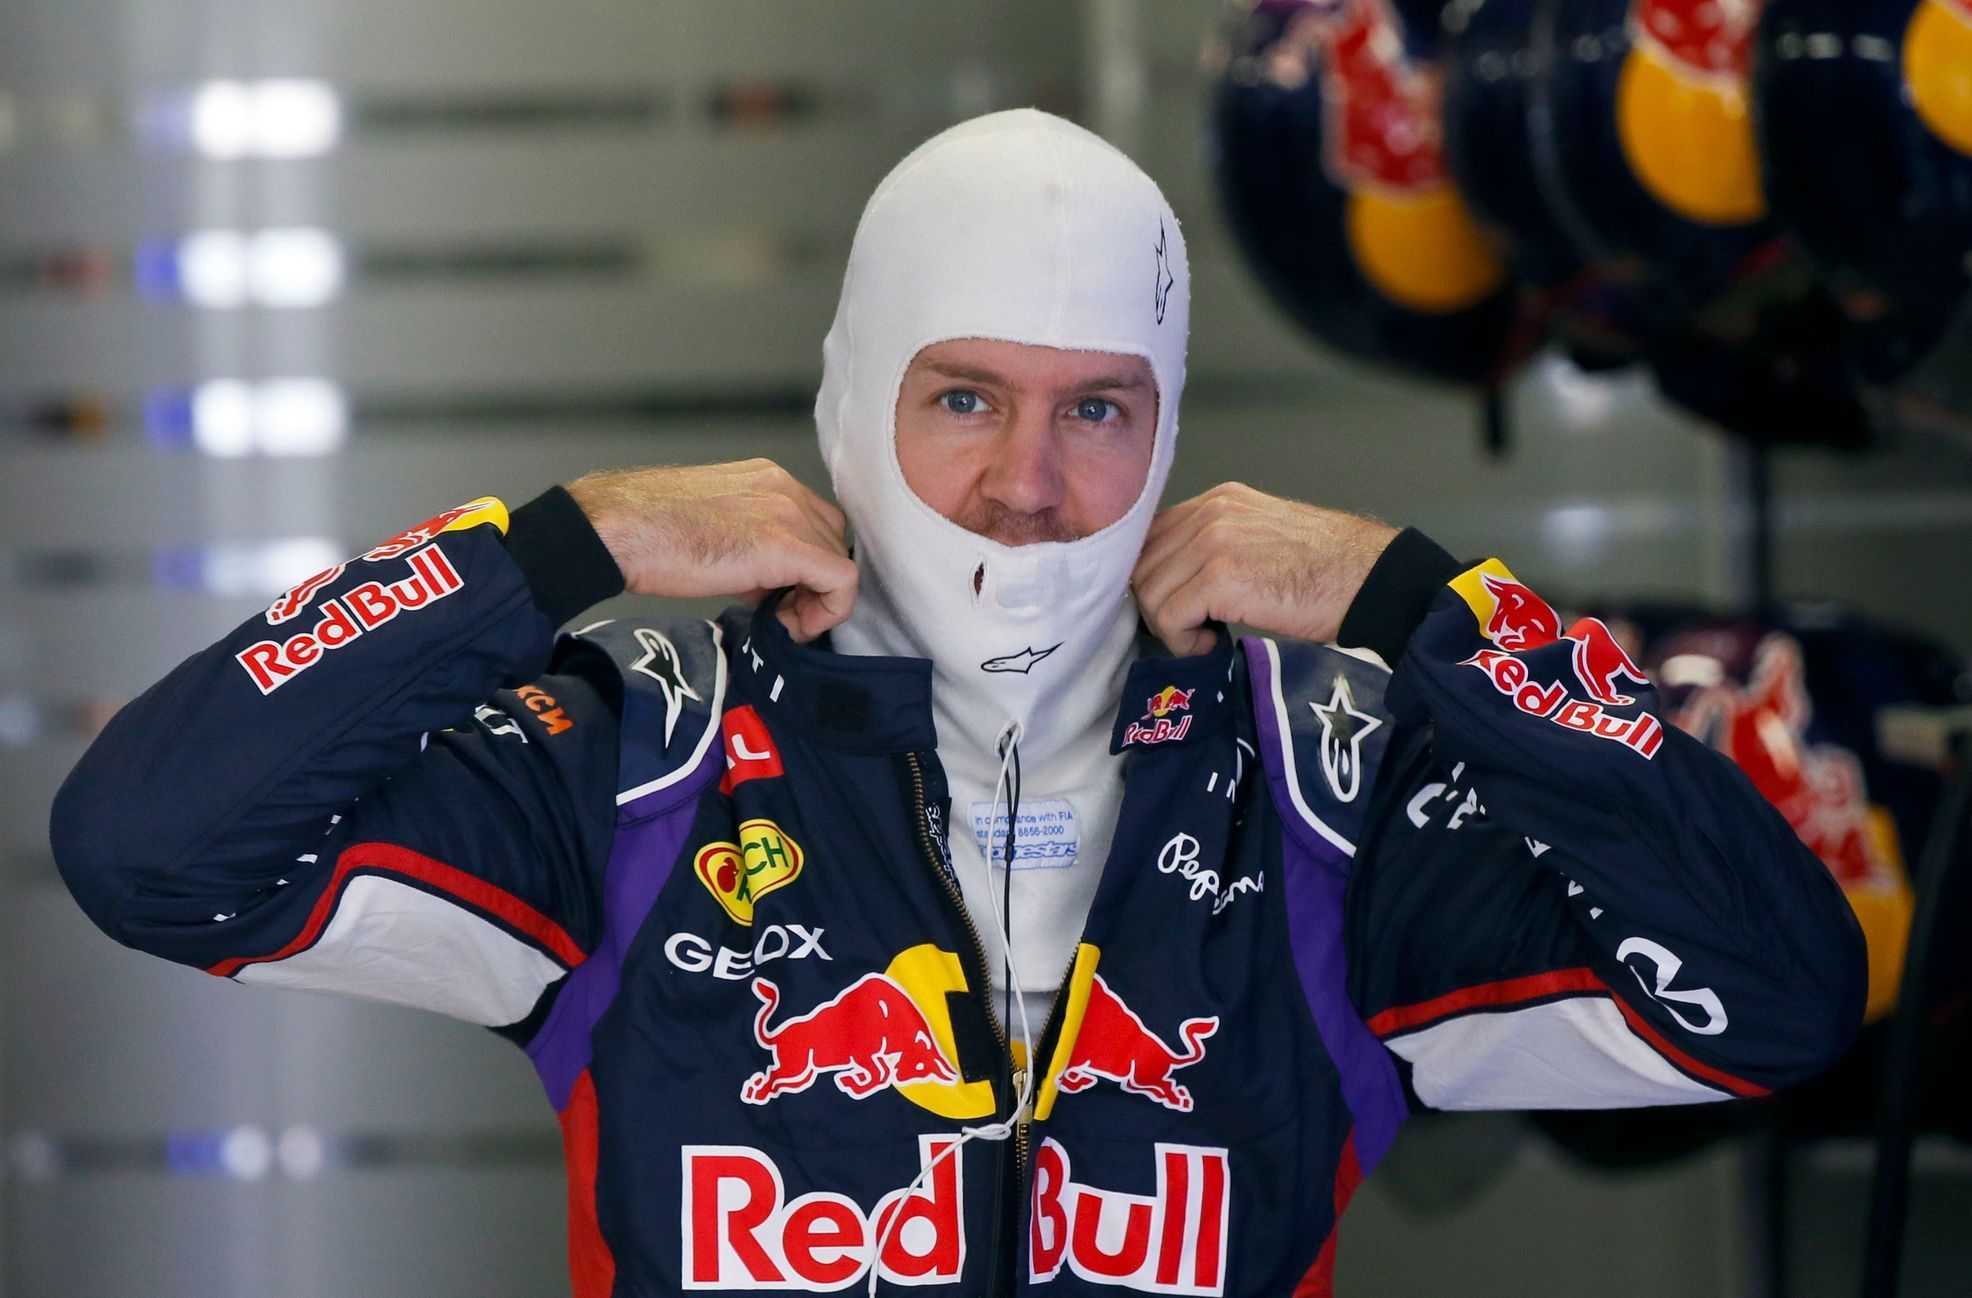 Red Bull Formula One driver Sebastian Vettel of Germany prepares for the third free practice session at the Russian F1 Grand Prix in the Sochi Autodrom circuit